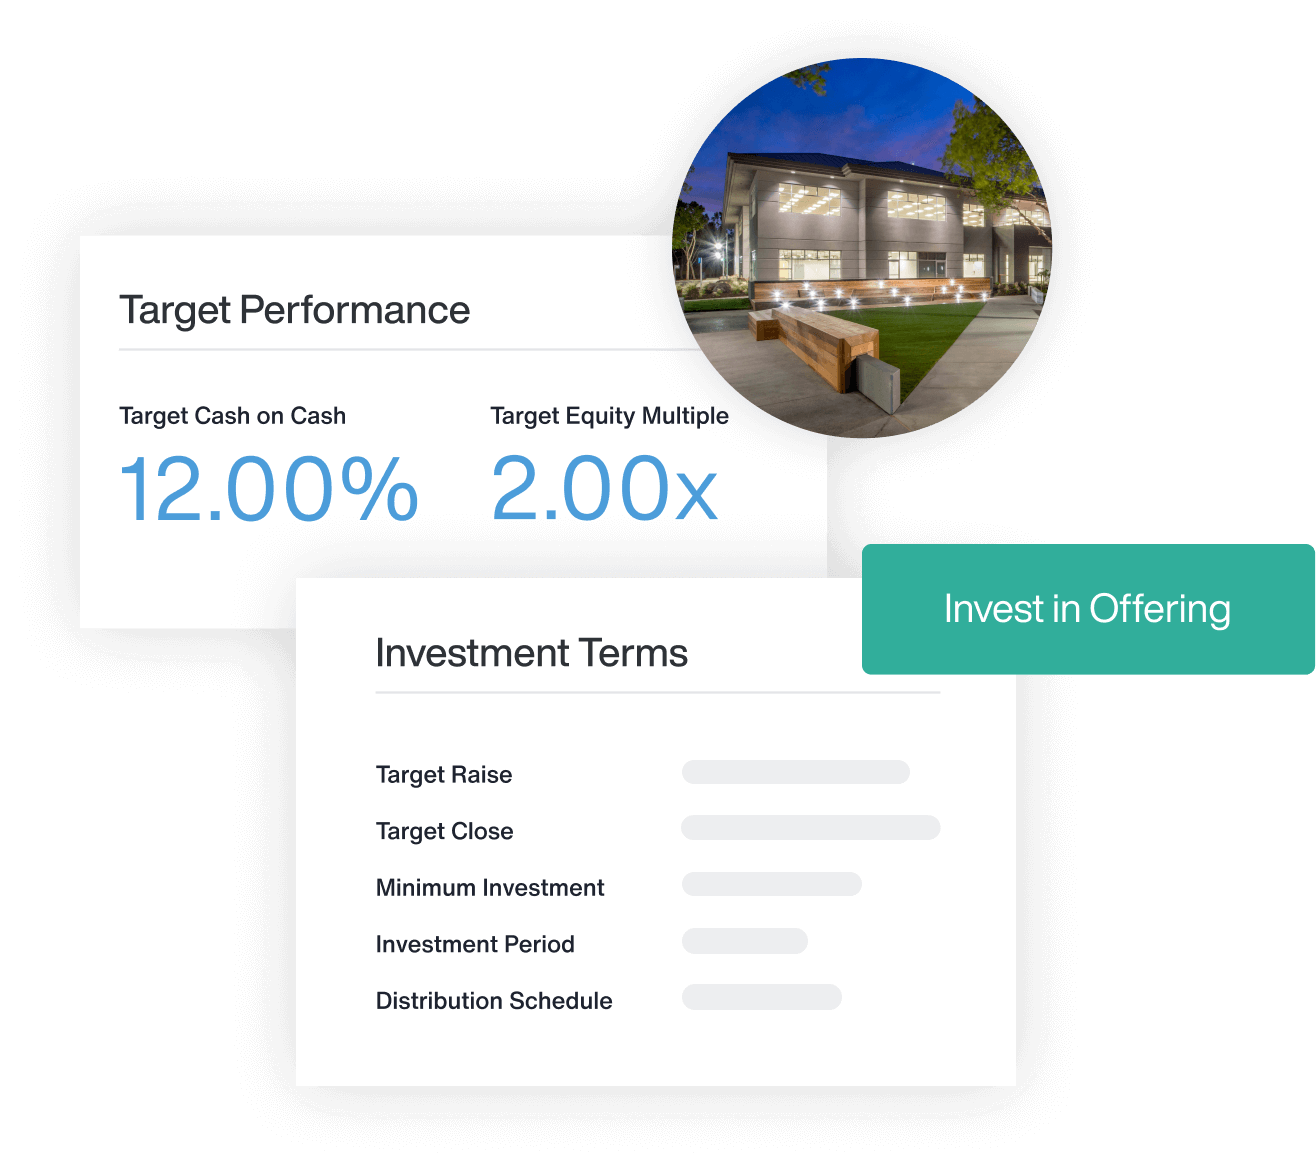 AppFolio Investment Management interface windows of Target Performance and Investment Terms, with a circle shaped residential building photo and a green Invest in Offering button.